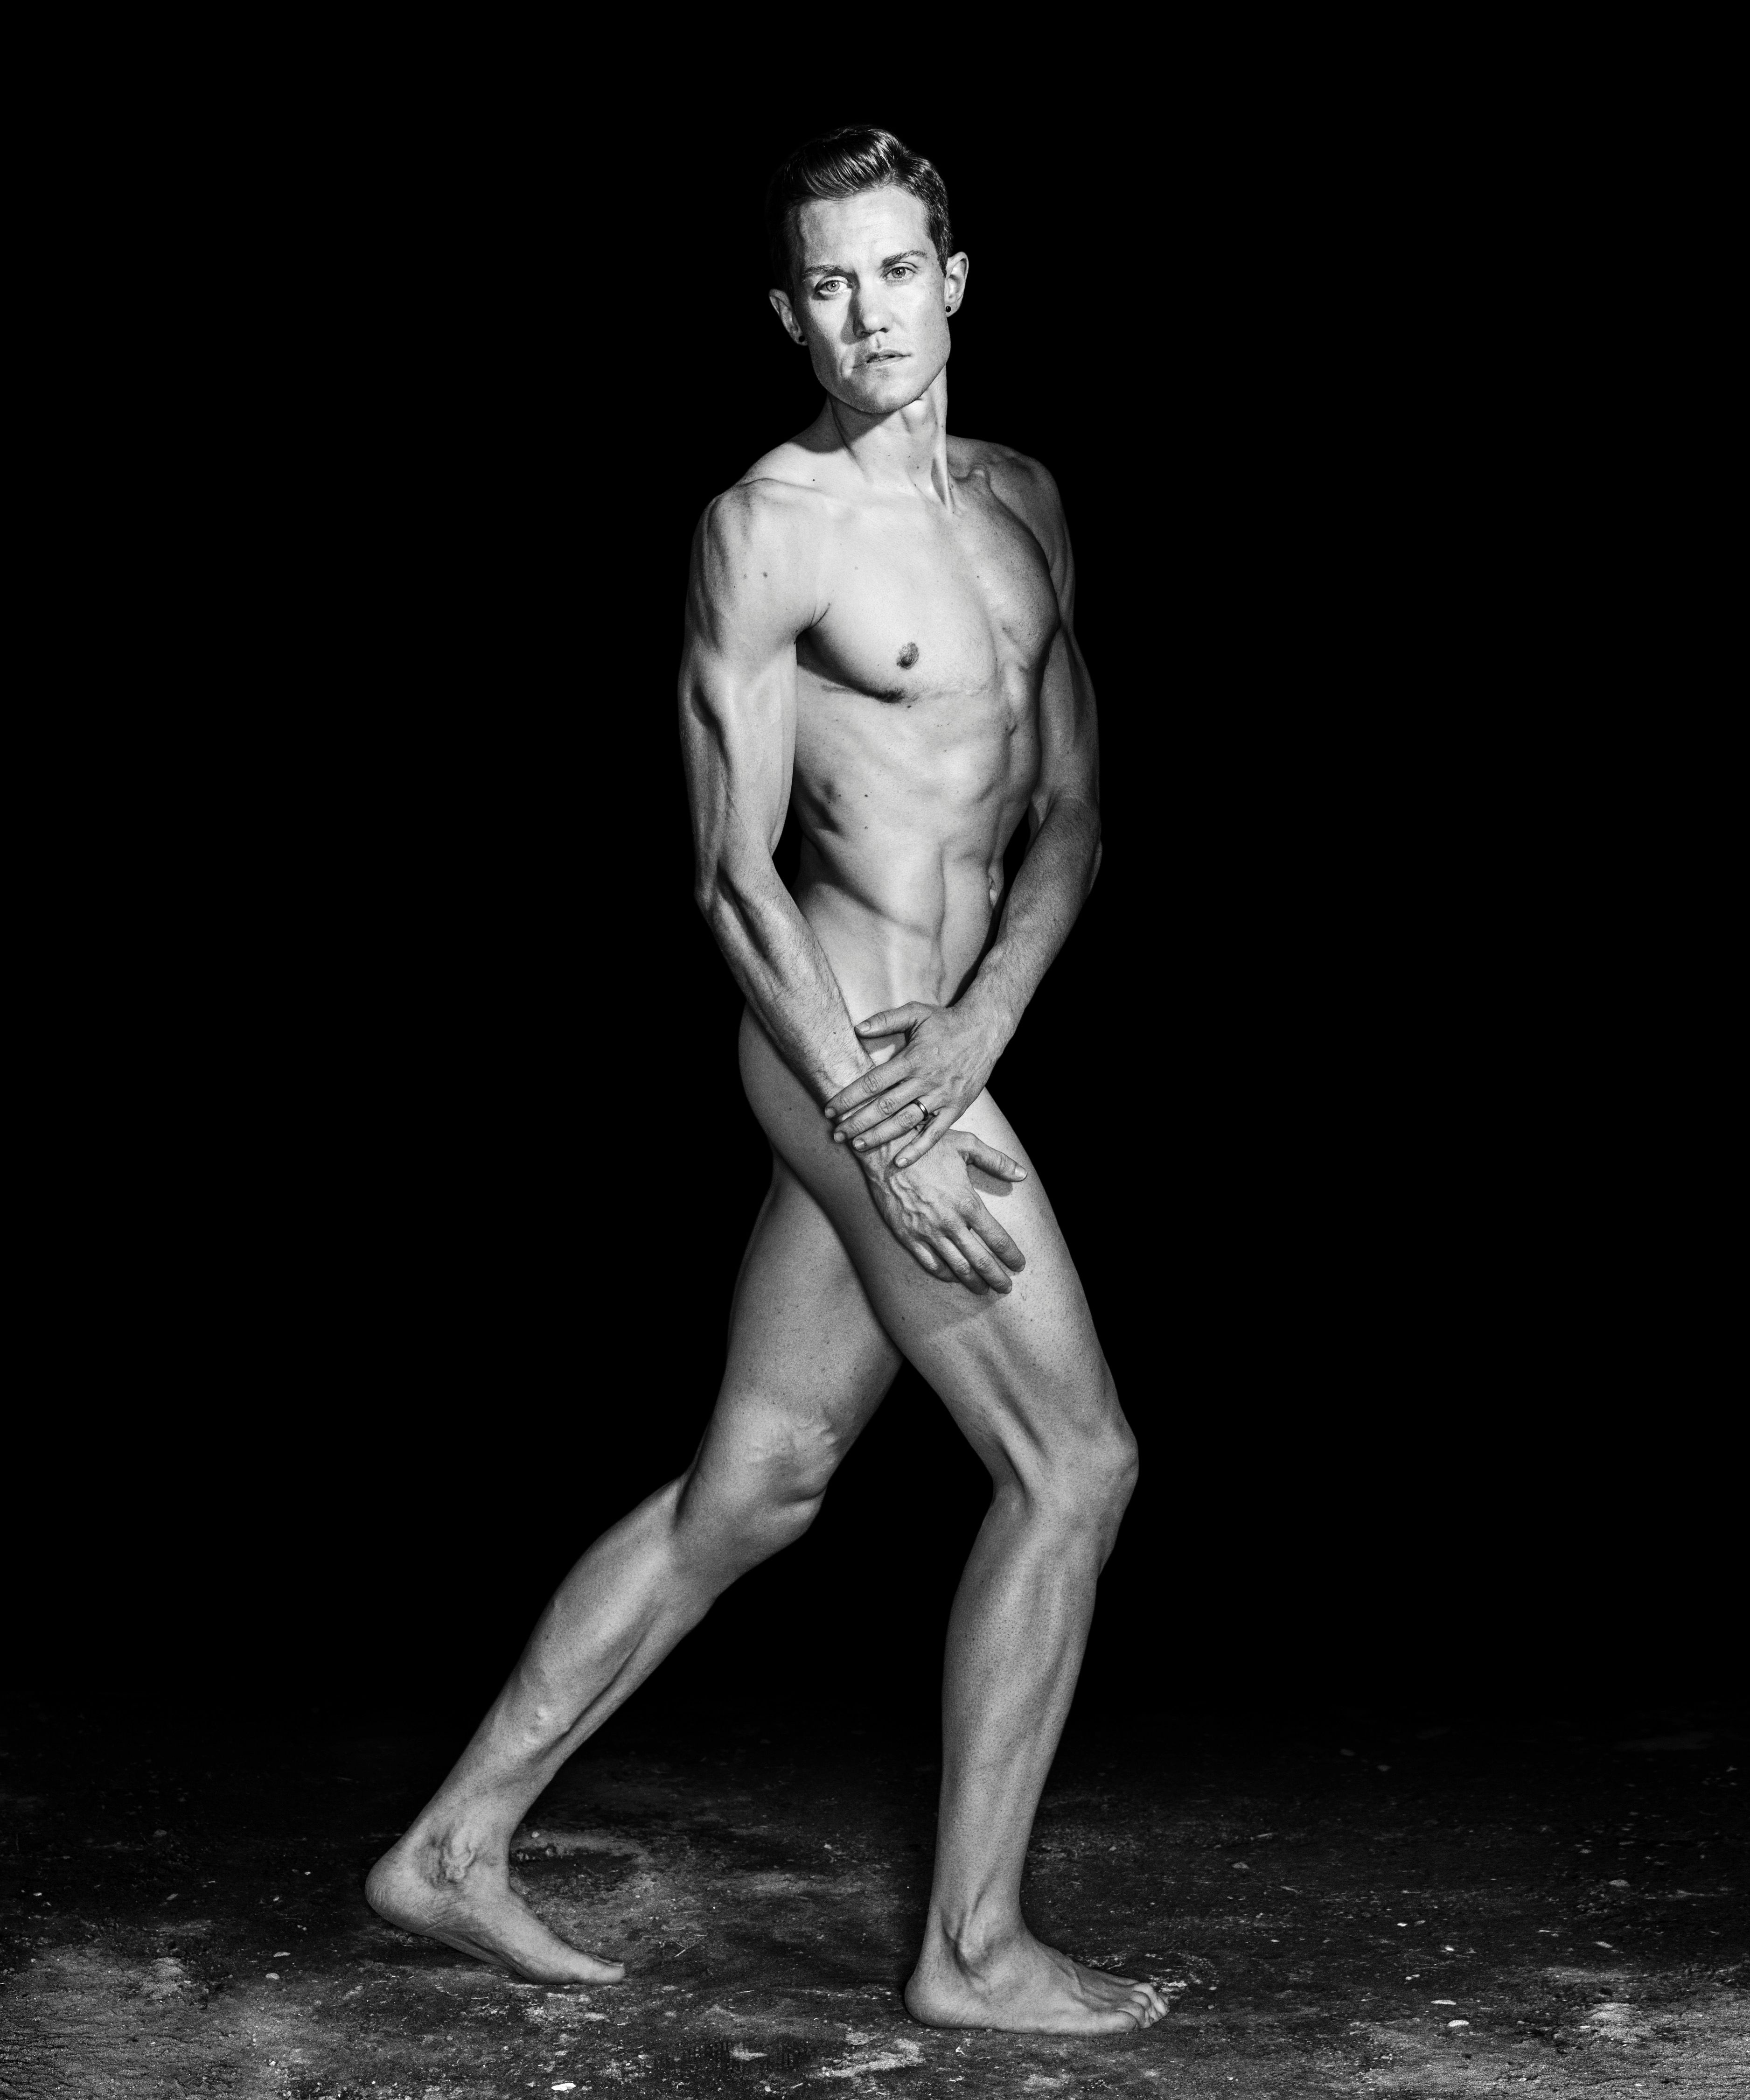 That S Me Body Issue 2016 Chris Mosier Behind The Scenes ESPN